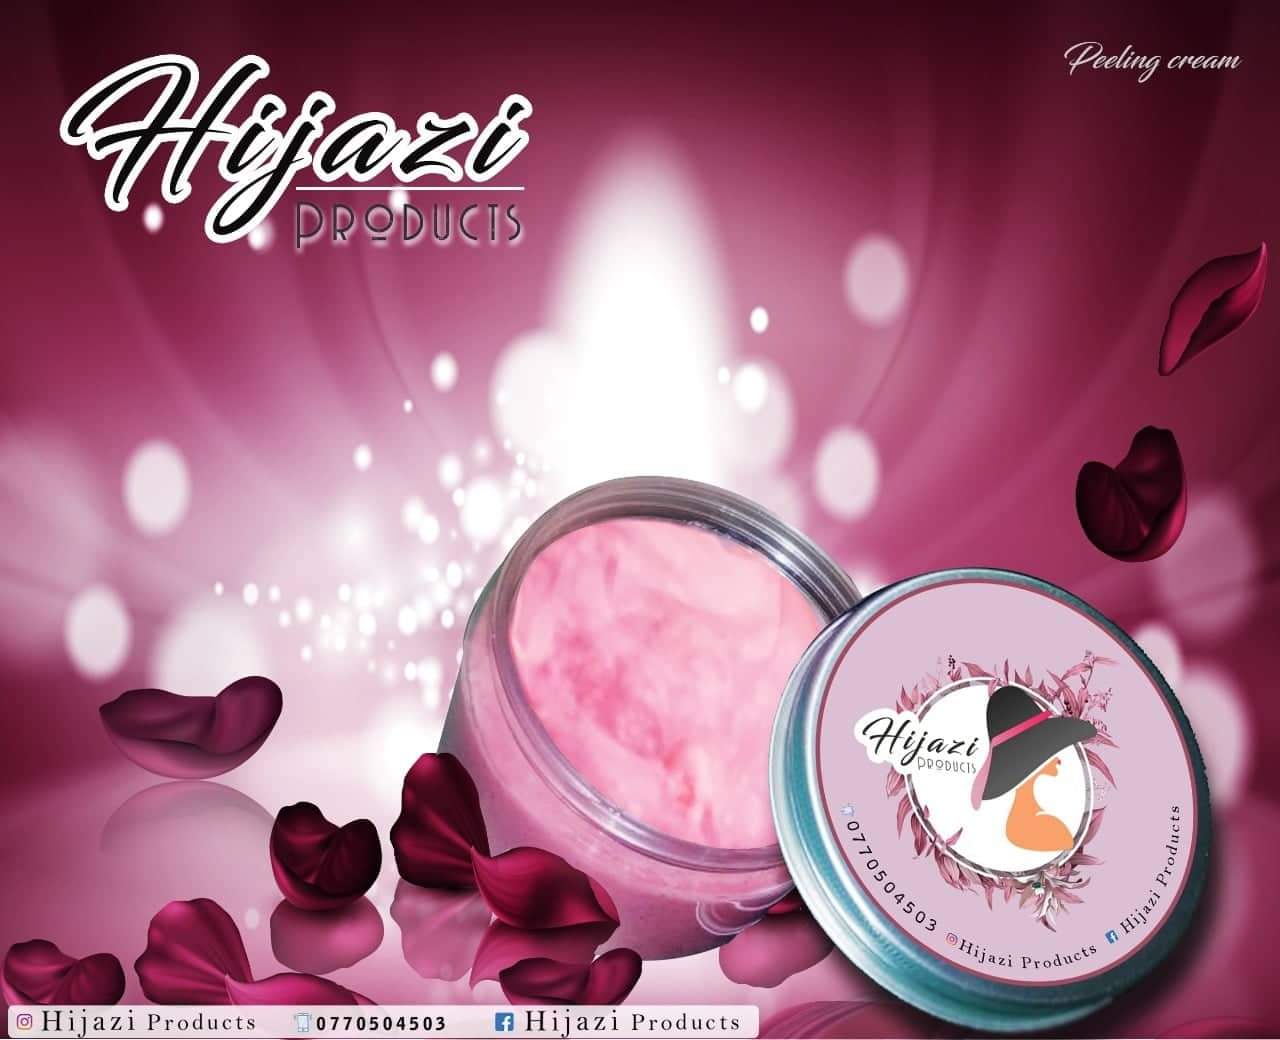 Hijazy products 4 your beauty